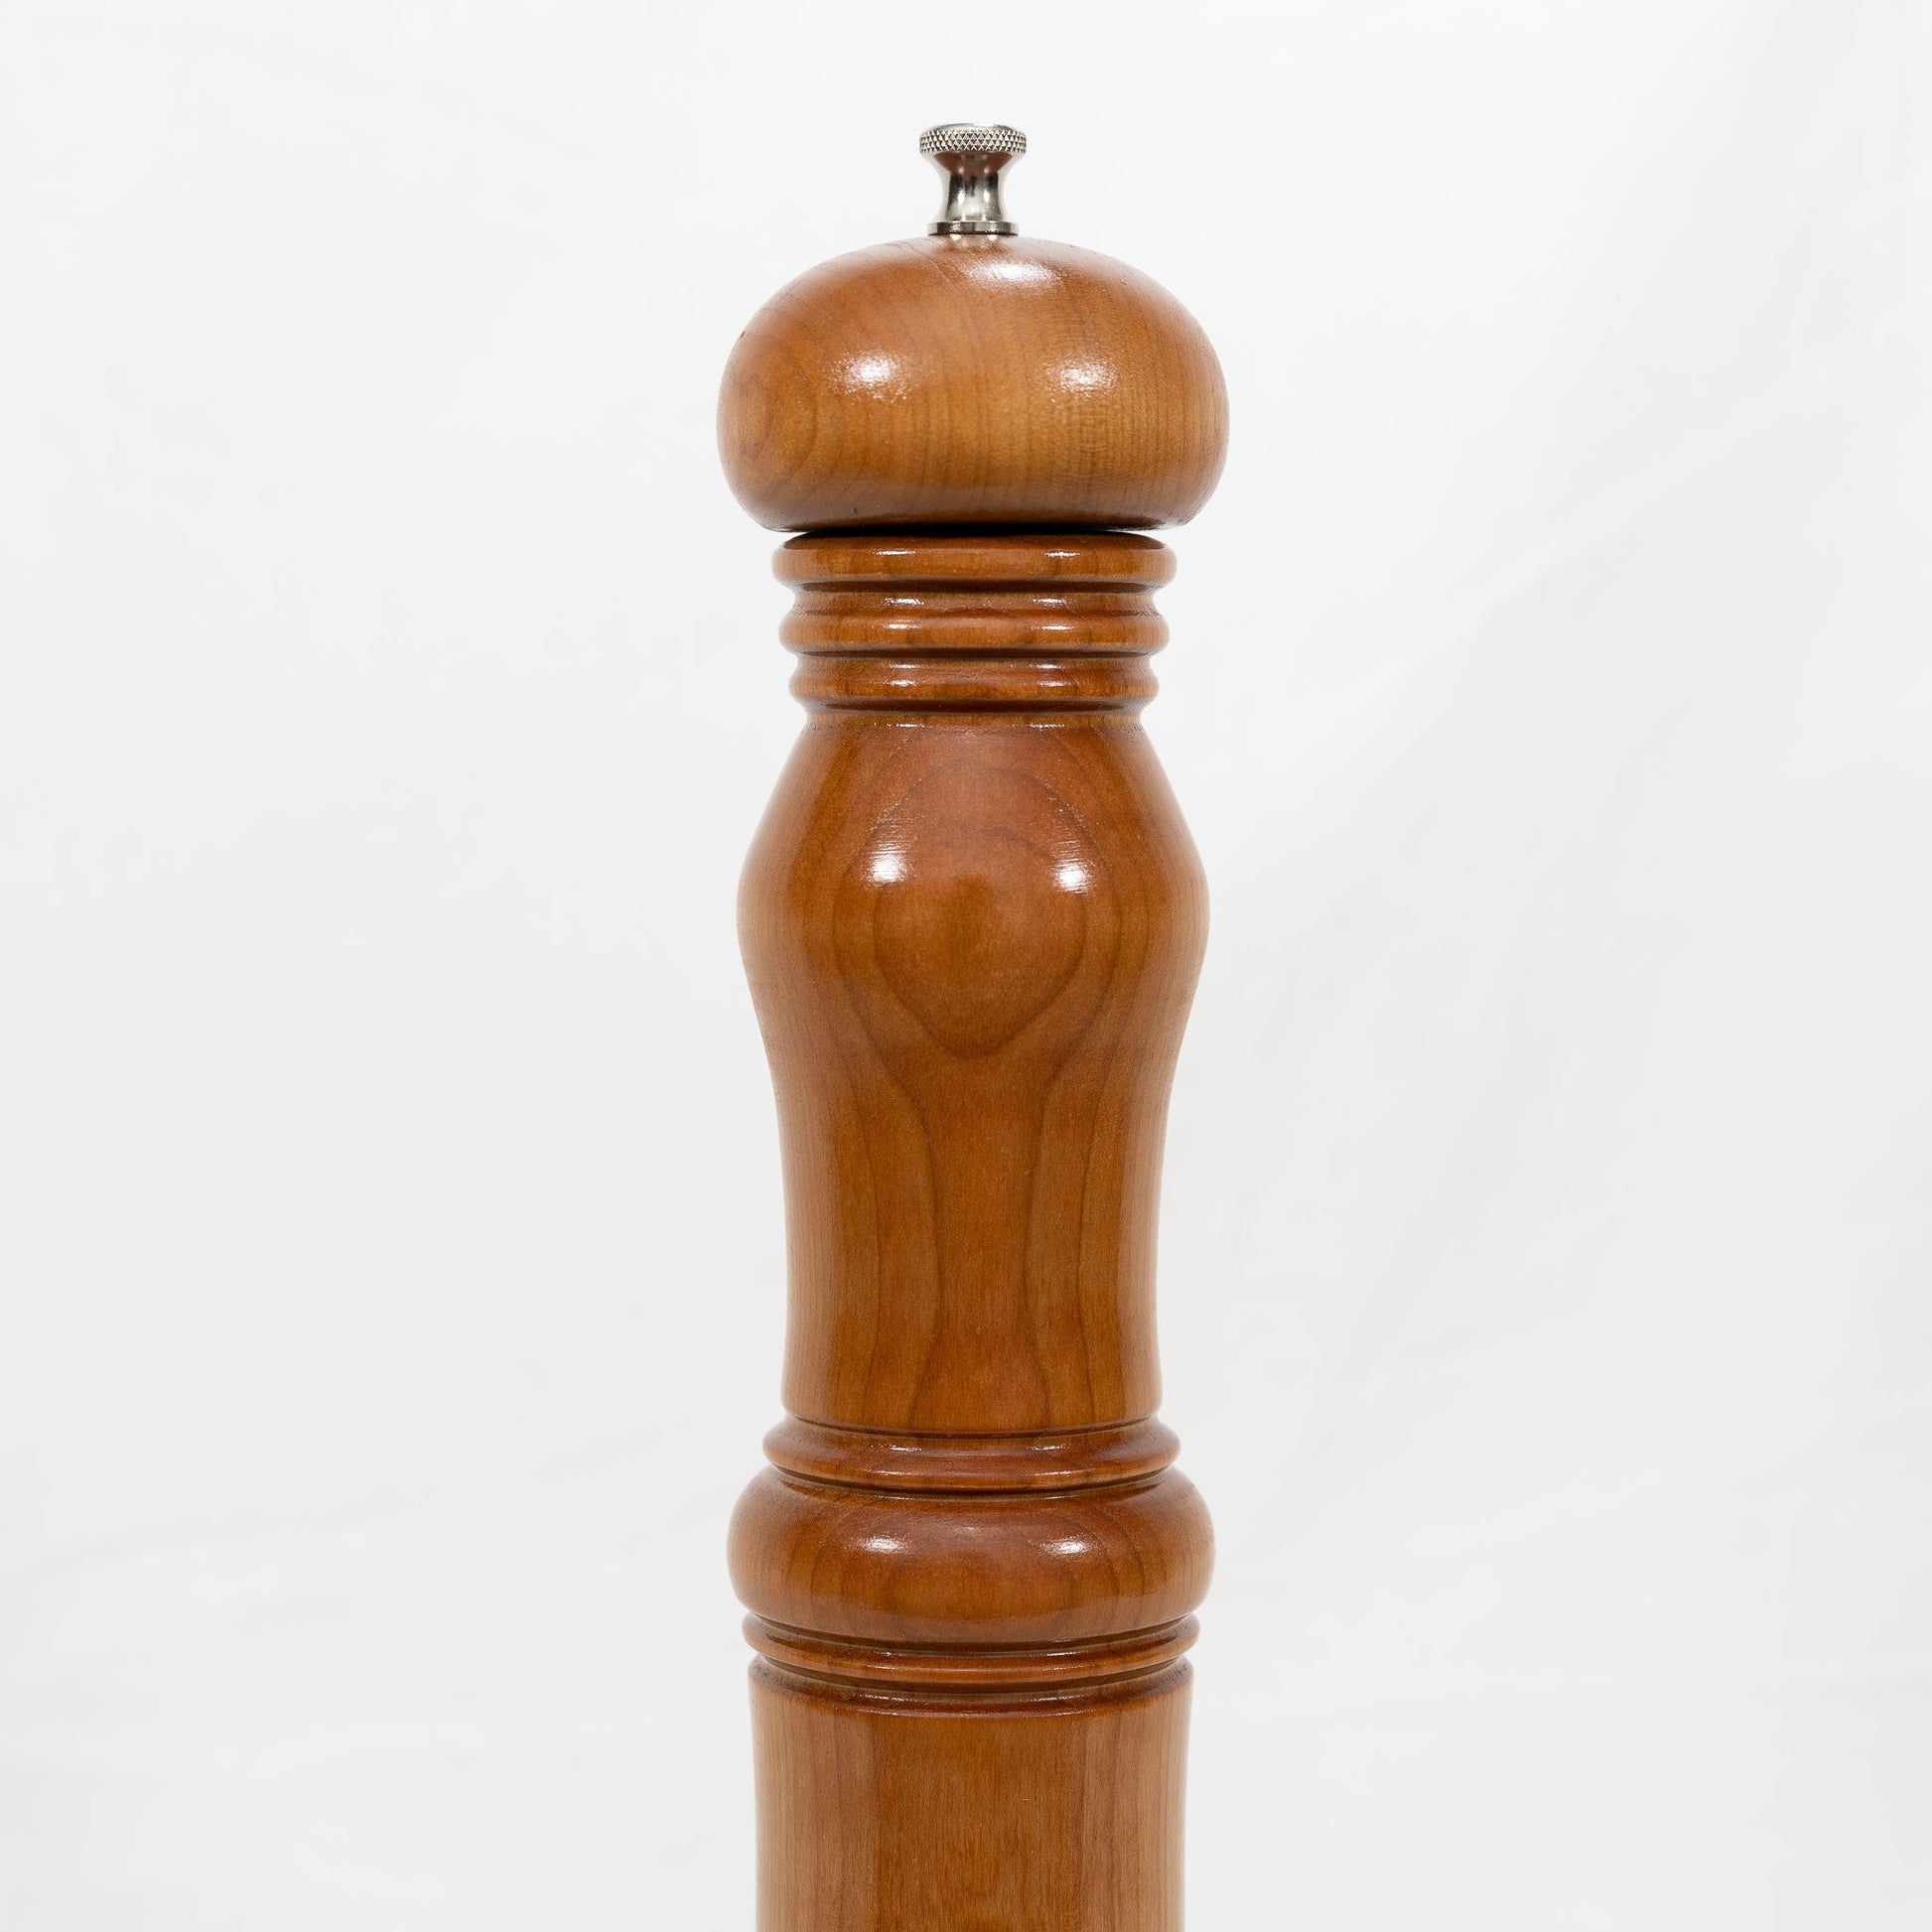 Handmade large Cherry wood adjustable pepper mill with stainless steel grinder with food grade safe finish